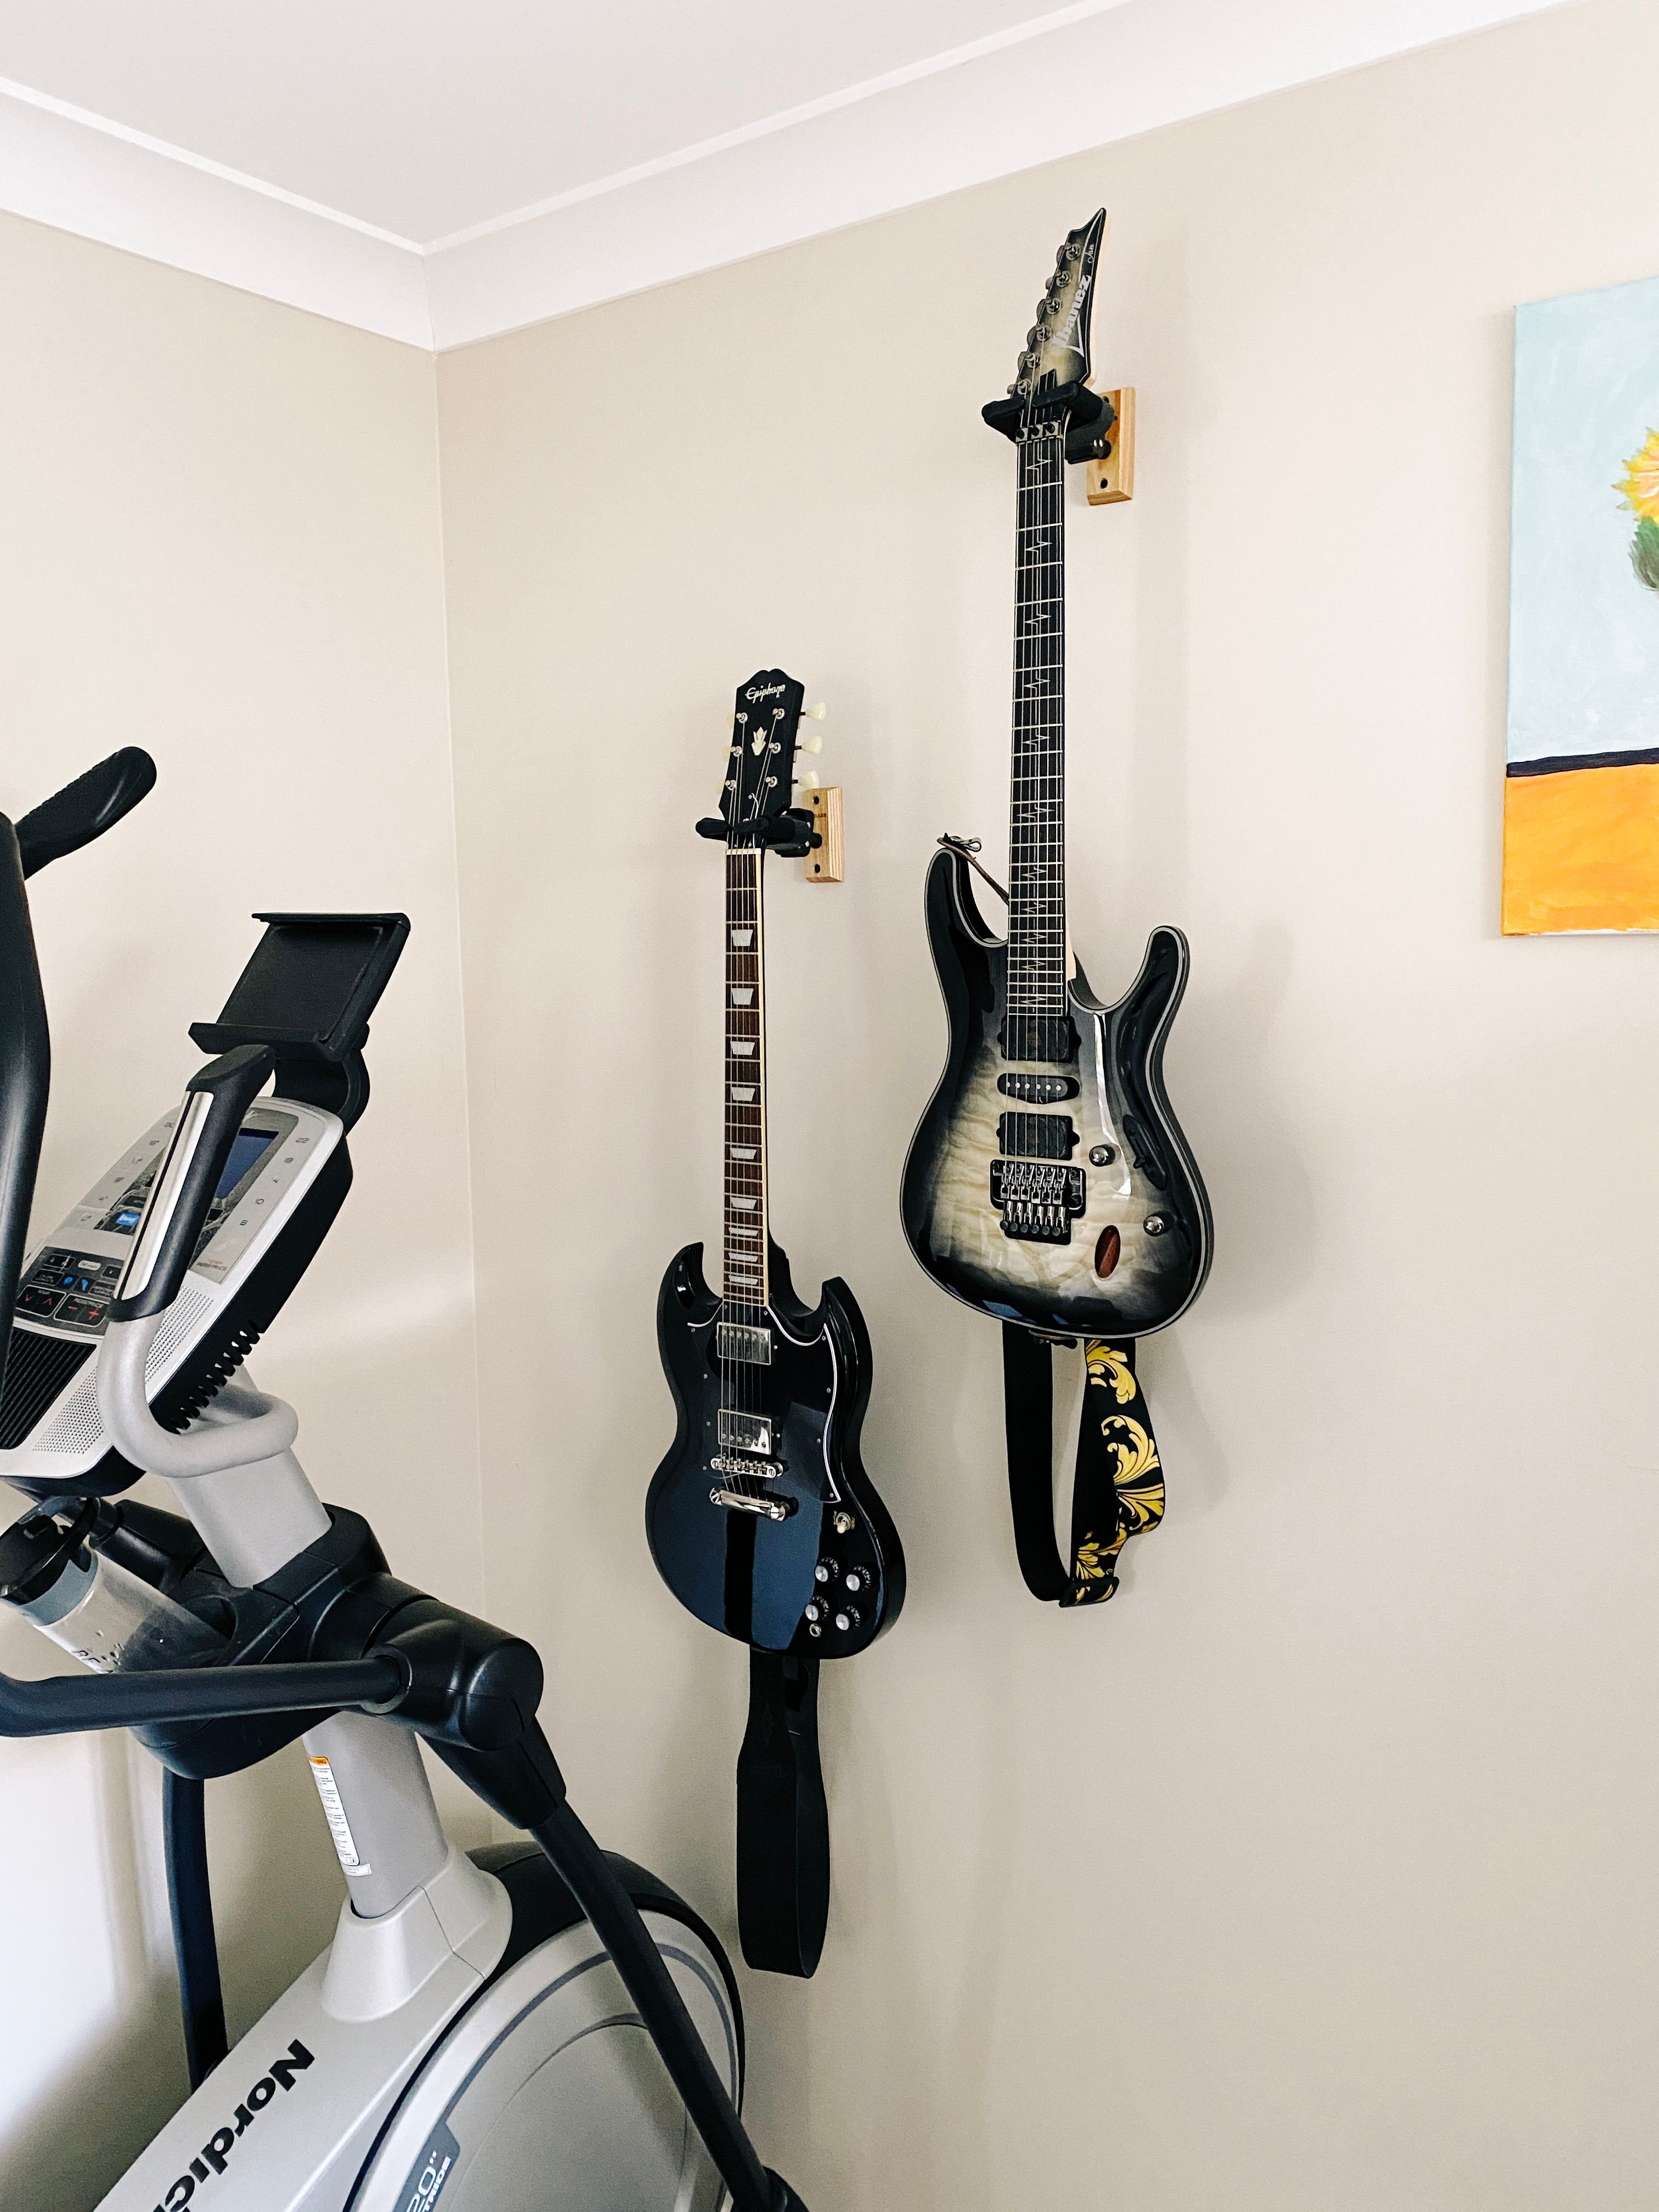 A photo of two electric guitars hanging from wall mounts.